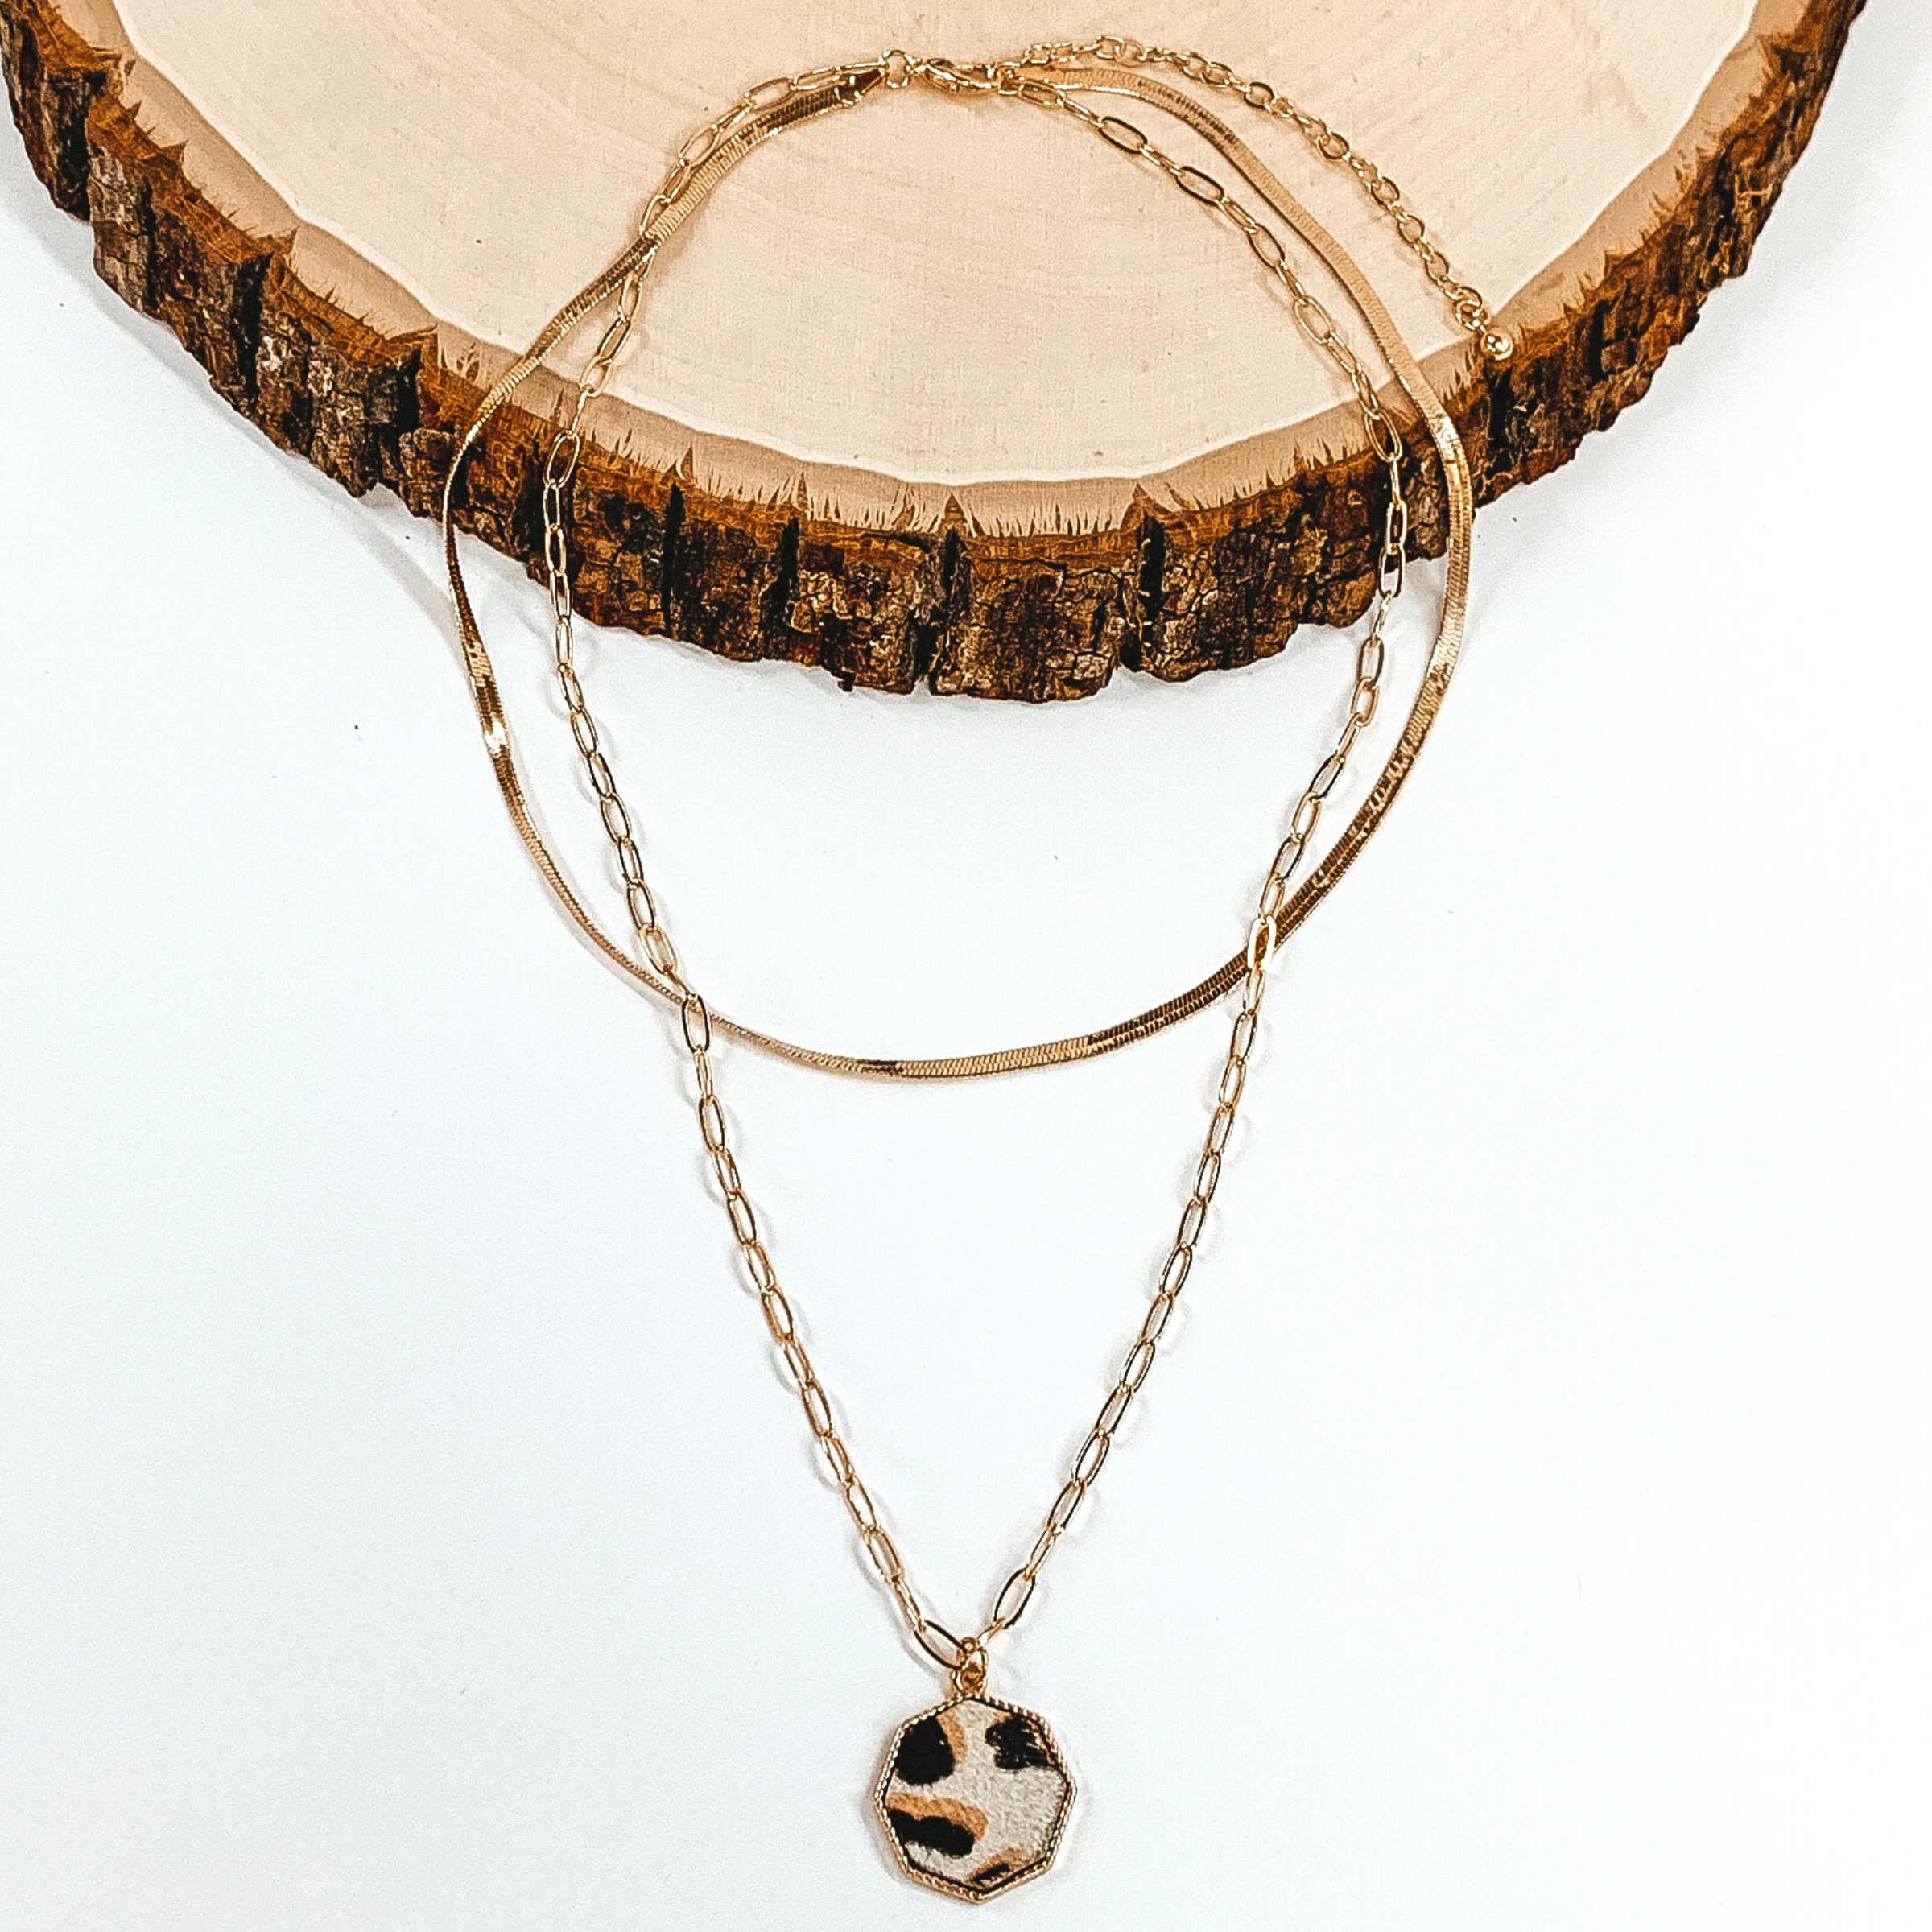 Gold paperclip doubled chain with an octagon pendant. The pendant has a white hide inlay with an animal print. This necklace is pictured laying on a piece of wood on a white background.